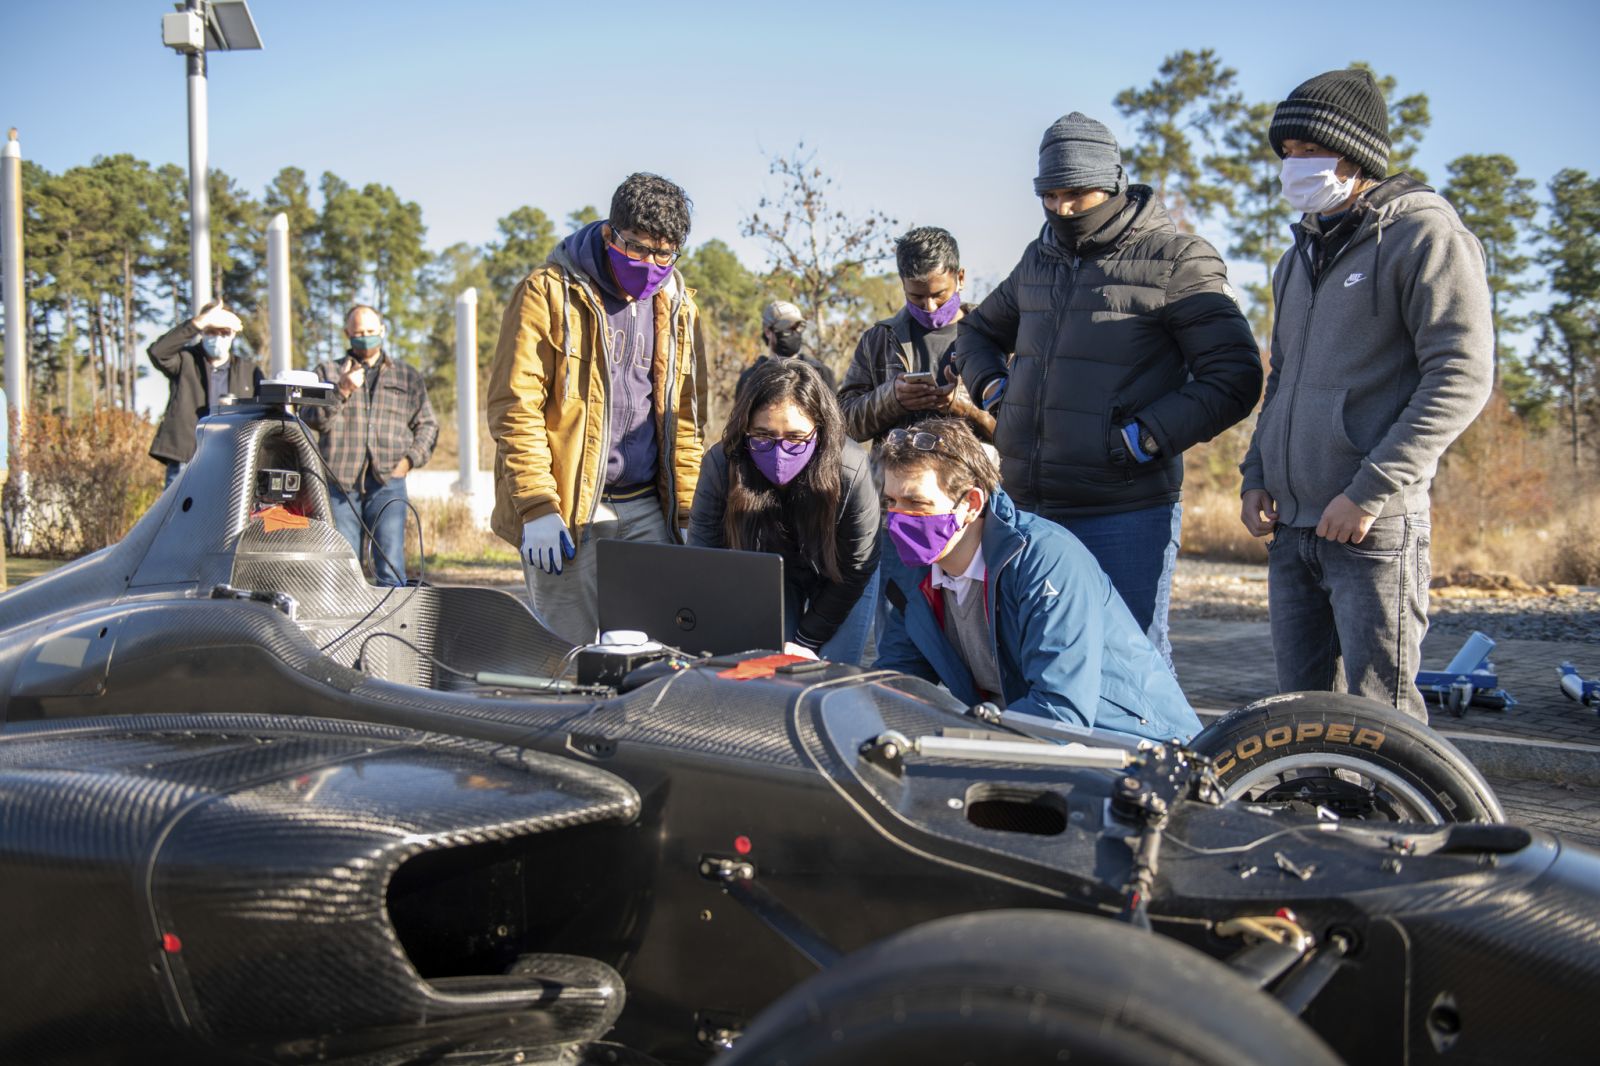 Members of the Deep Orange 12 team collaborate to test their new ride. In the background on the left stands a lightpole fitted with Poxyz's ultra-wideband receptor used to help navigate autonomous vehicles. (Photo/Provided)